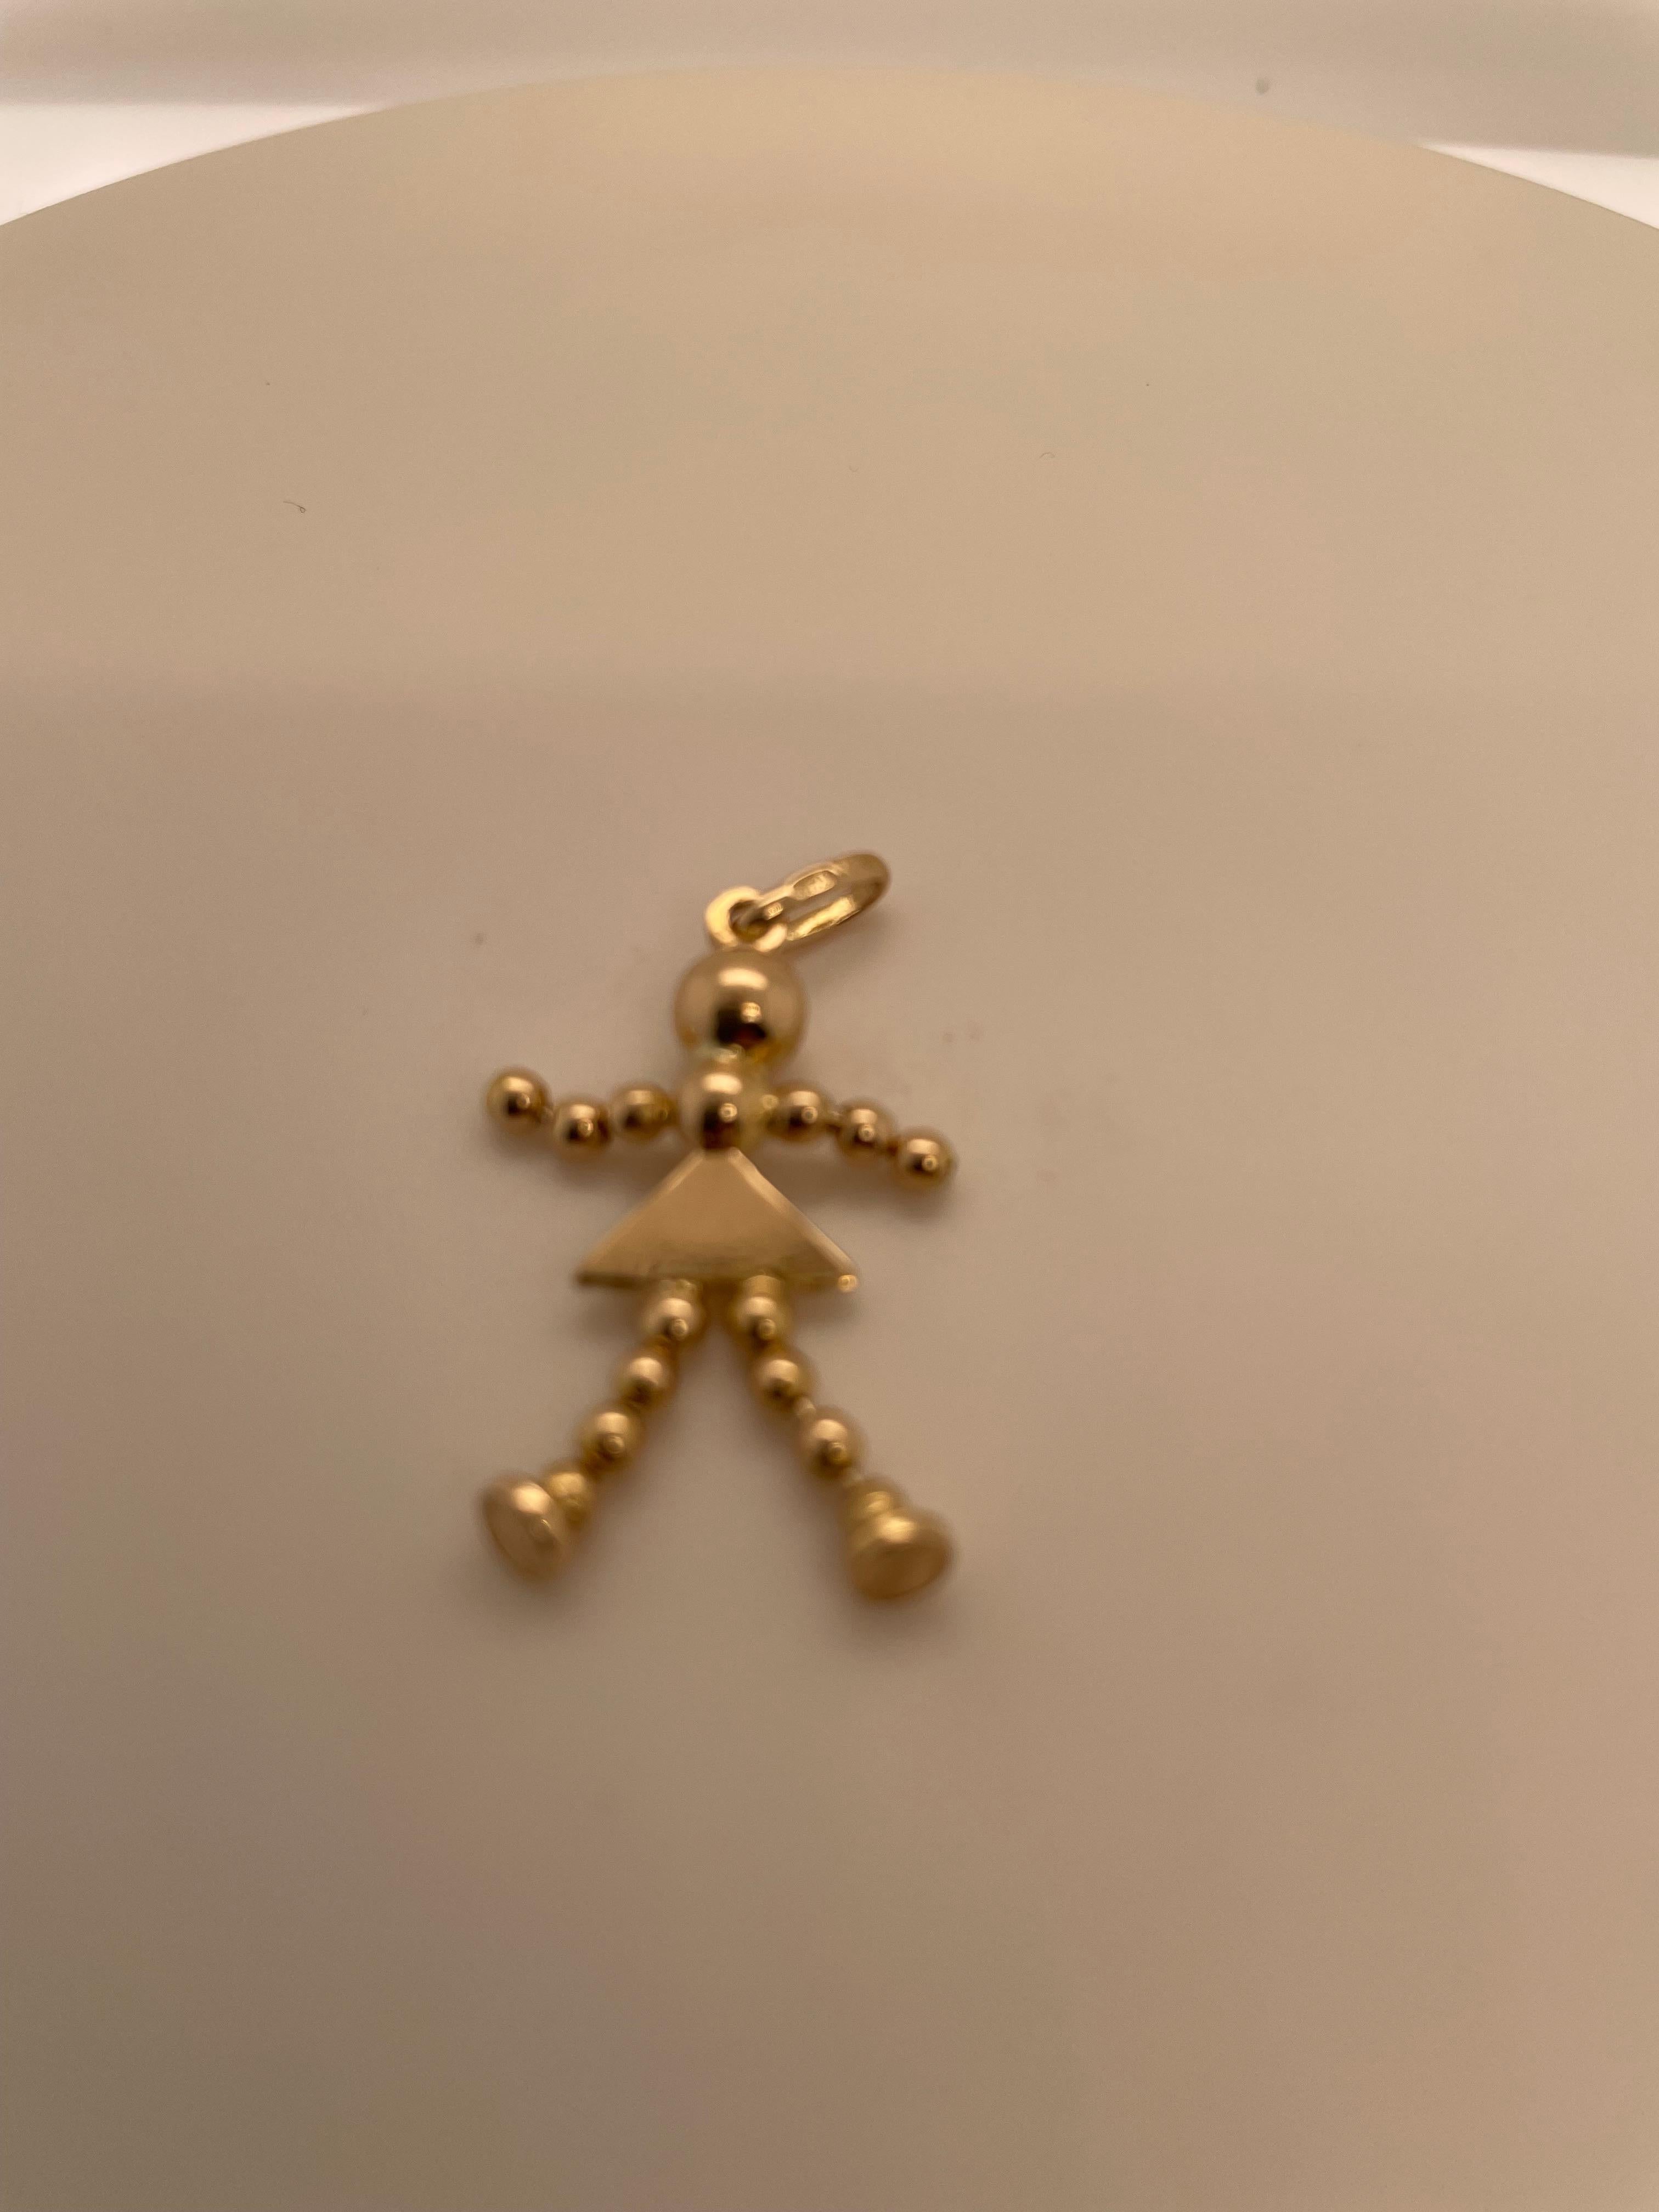 Beaded Moveable Girl Charm In Excellent Condition For Sale In New York, NY